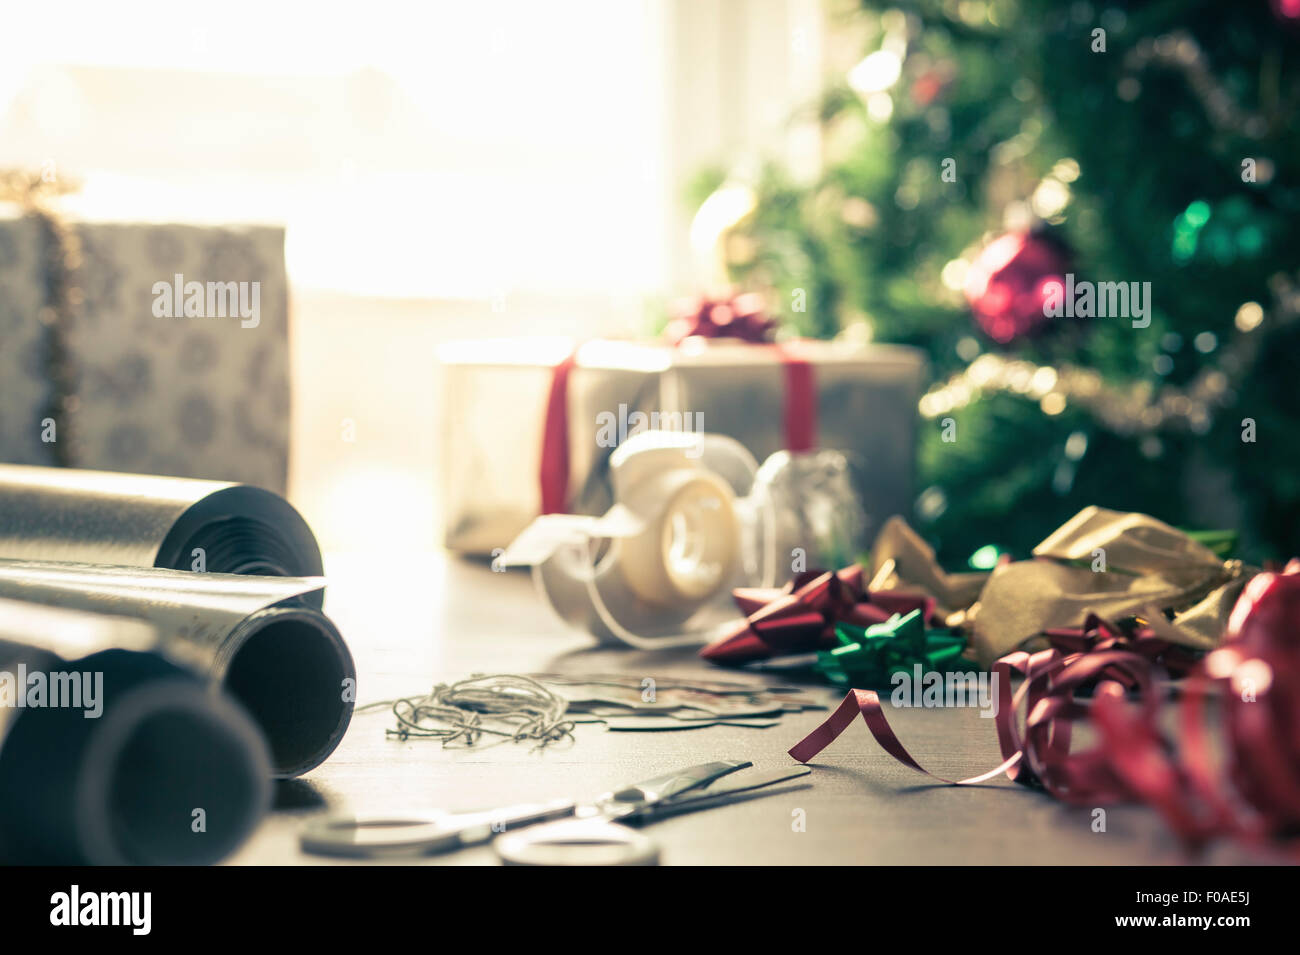 Christmas wrapping paper and ribbons Stock Photo